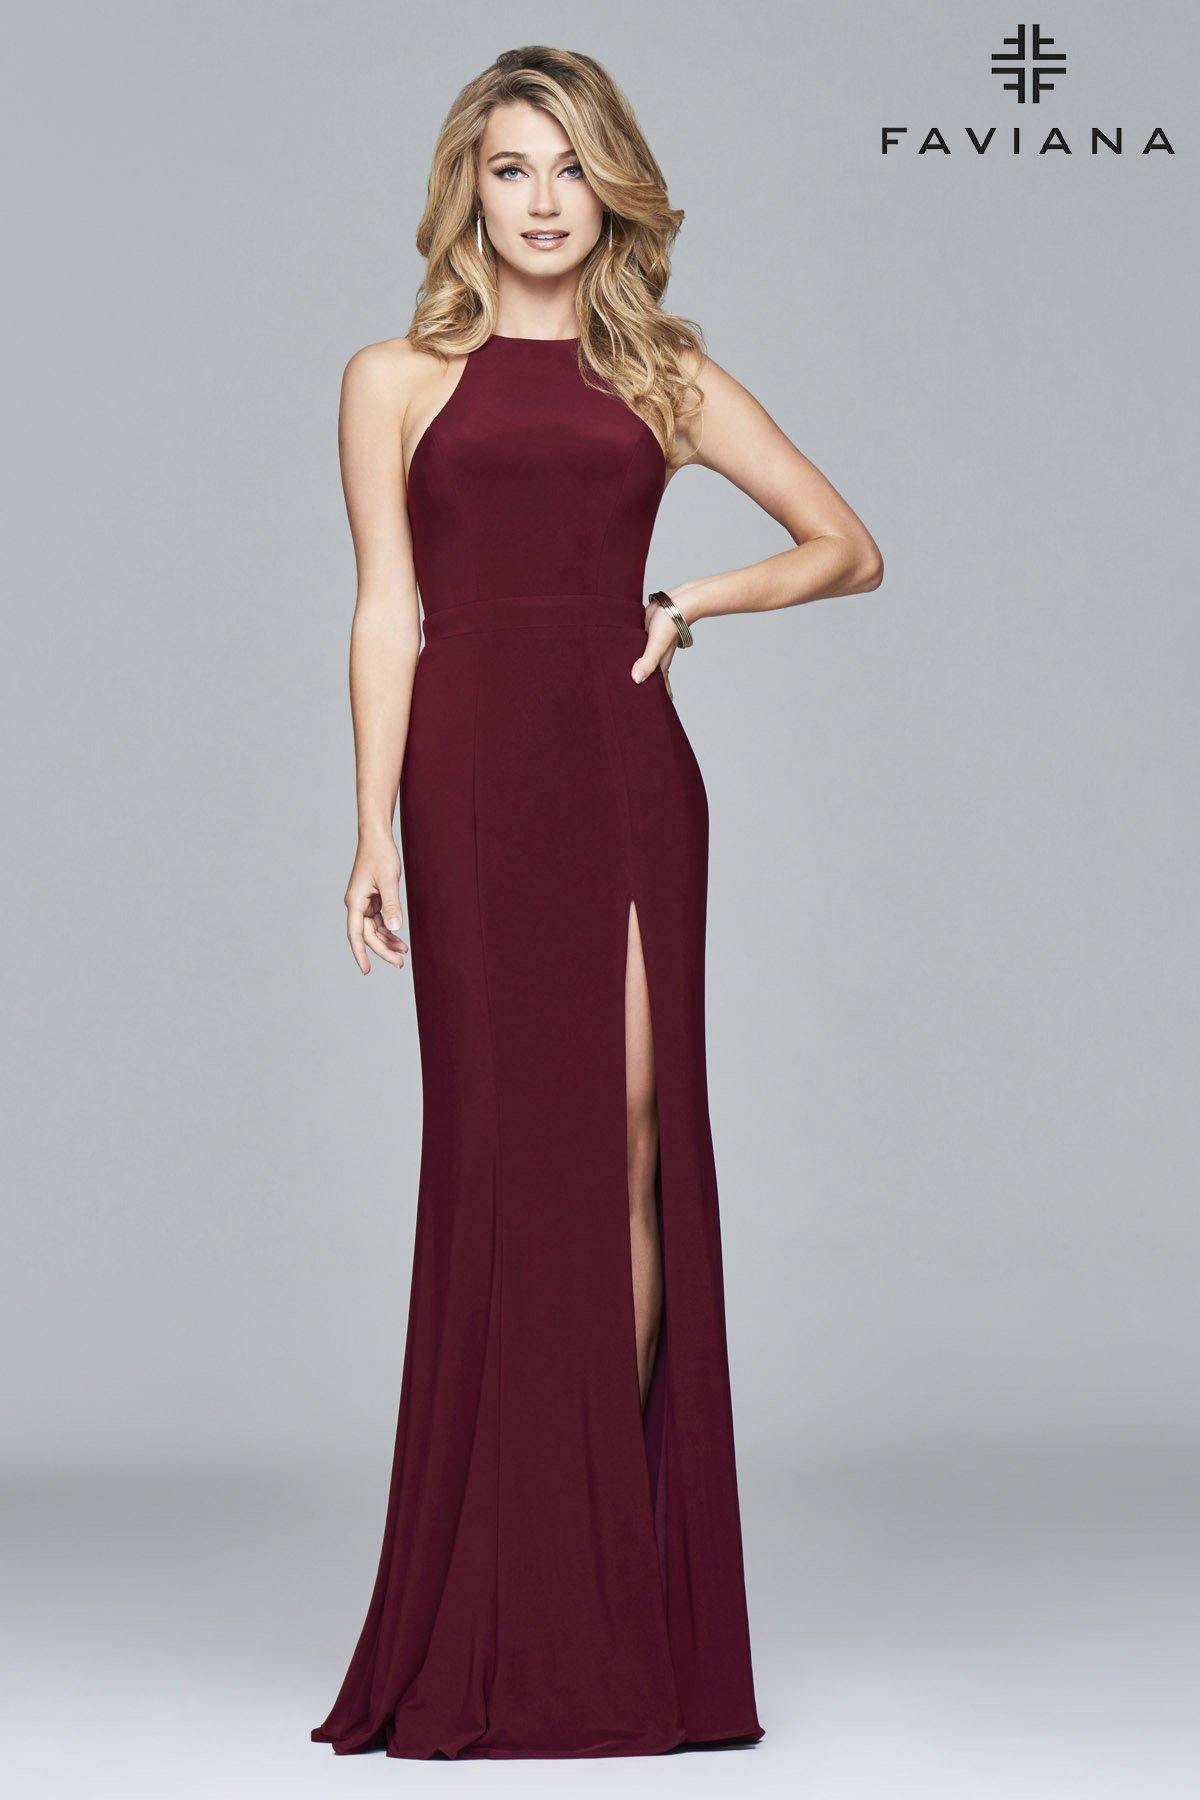 Faviana 7976 Long Fitted Jersey Gown - The Dress Outlet Faviana